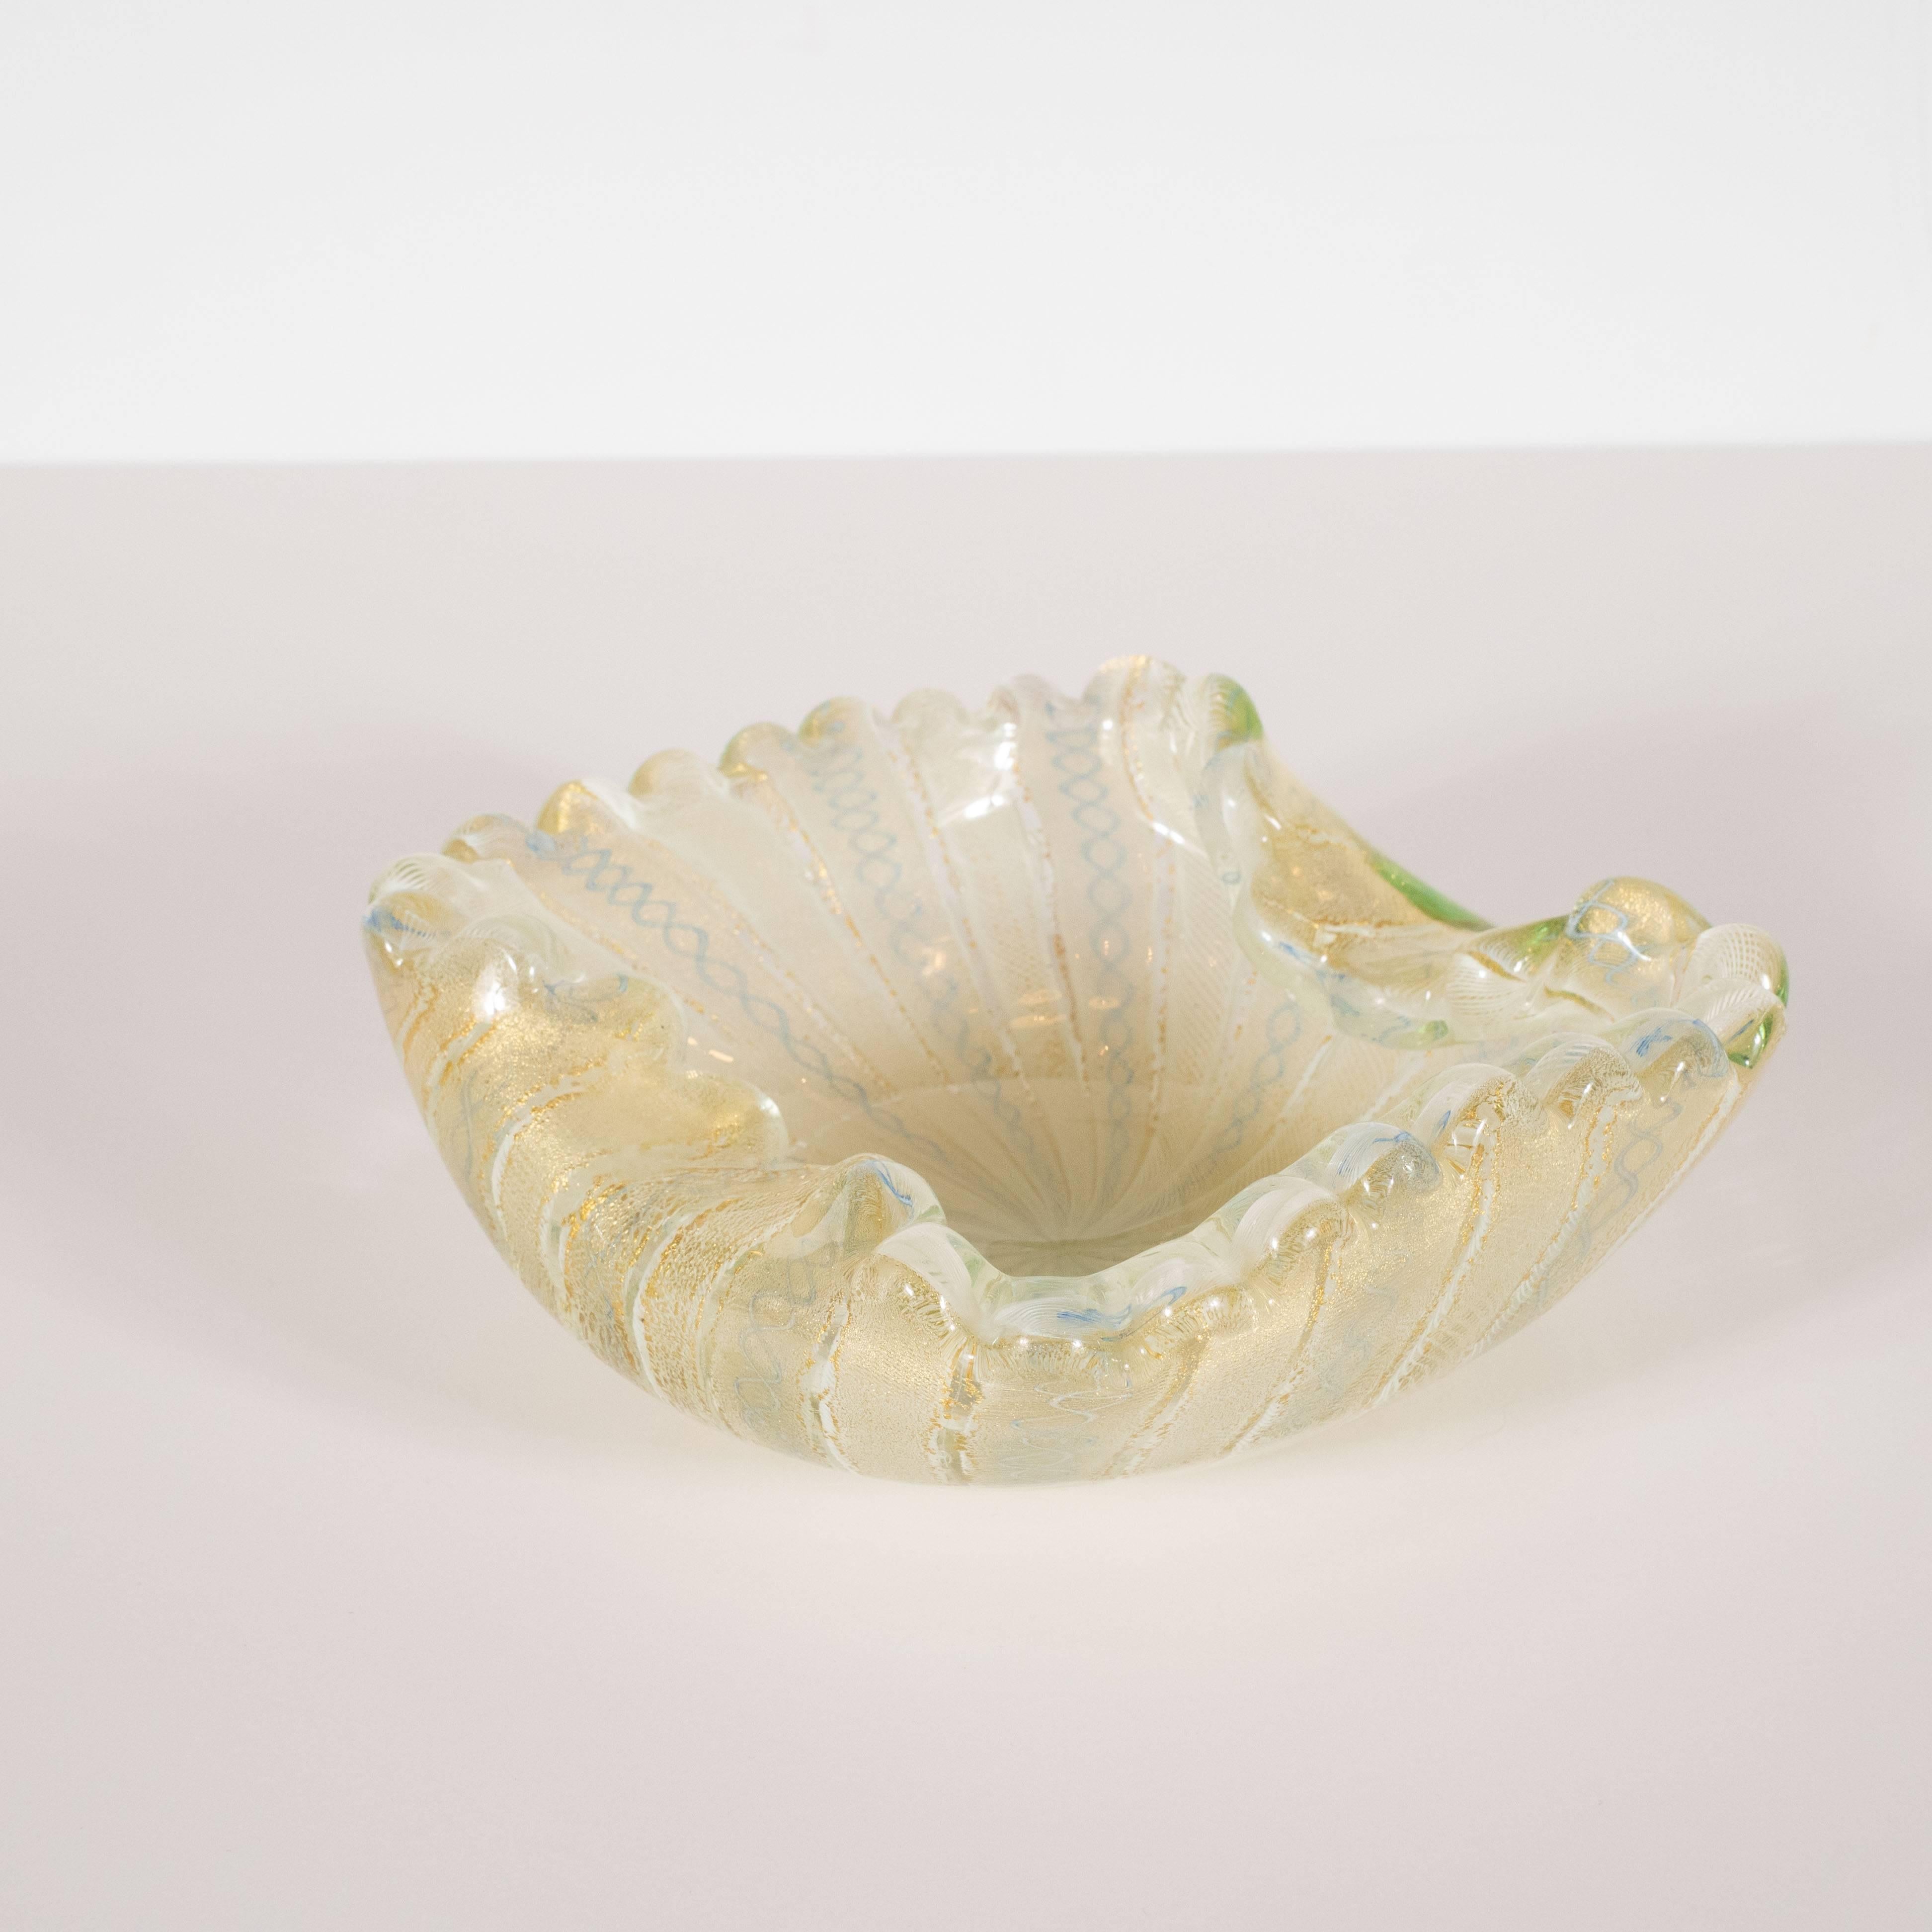 This stunning Mid-Century Modern decorative bowl was hand blown in Murano, Italy- the islands off the coast of Venice, renowned for centuries for their superlative glass production, circa 1950. It features scalloped edges; two sinuously curved